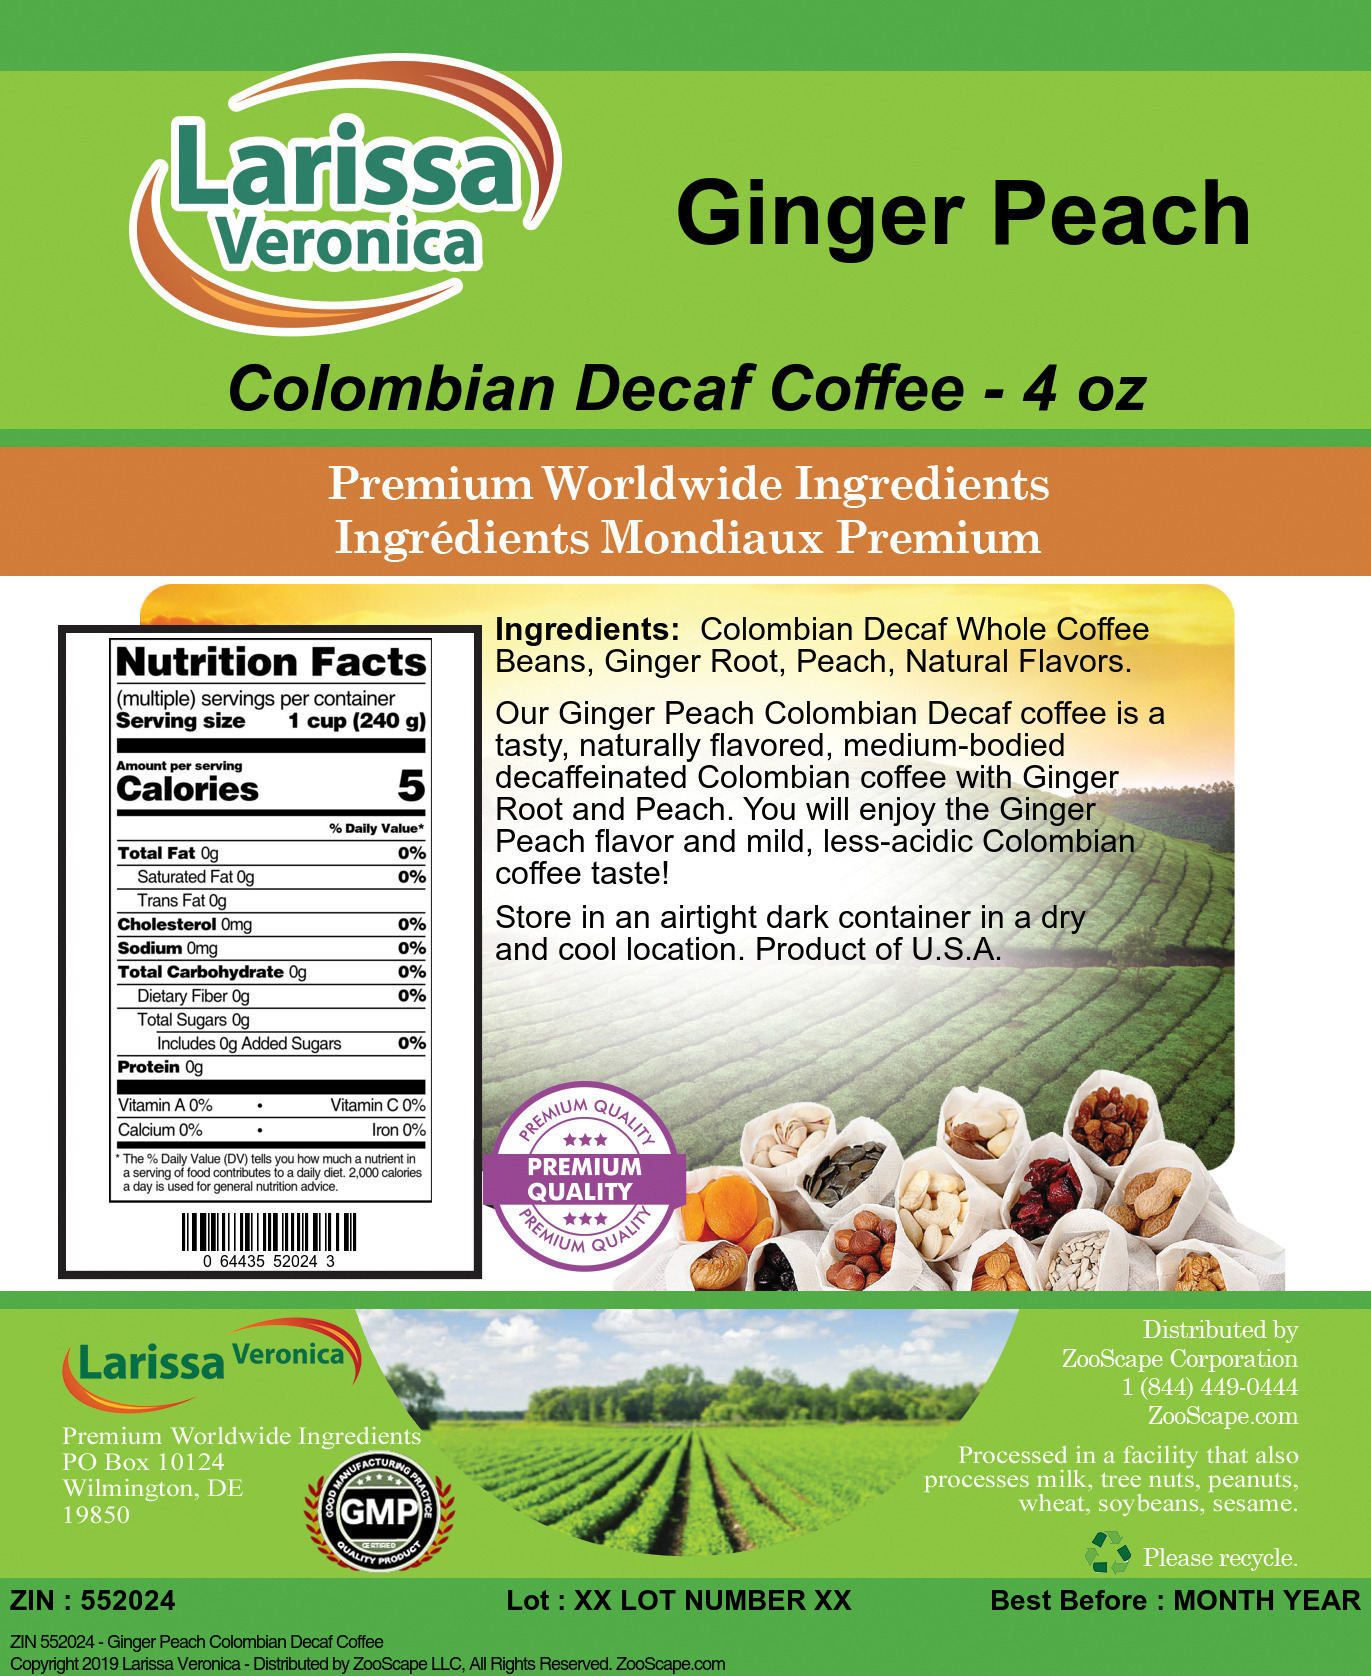 Ginger Peach Colombian Decaf Coffee - Label